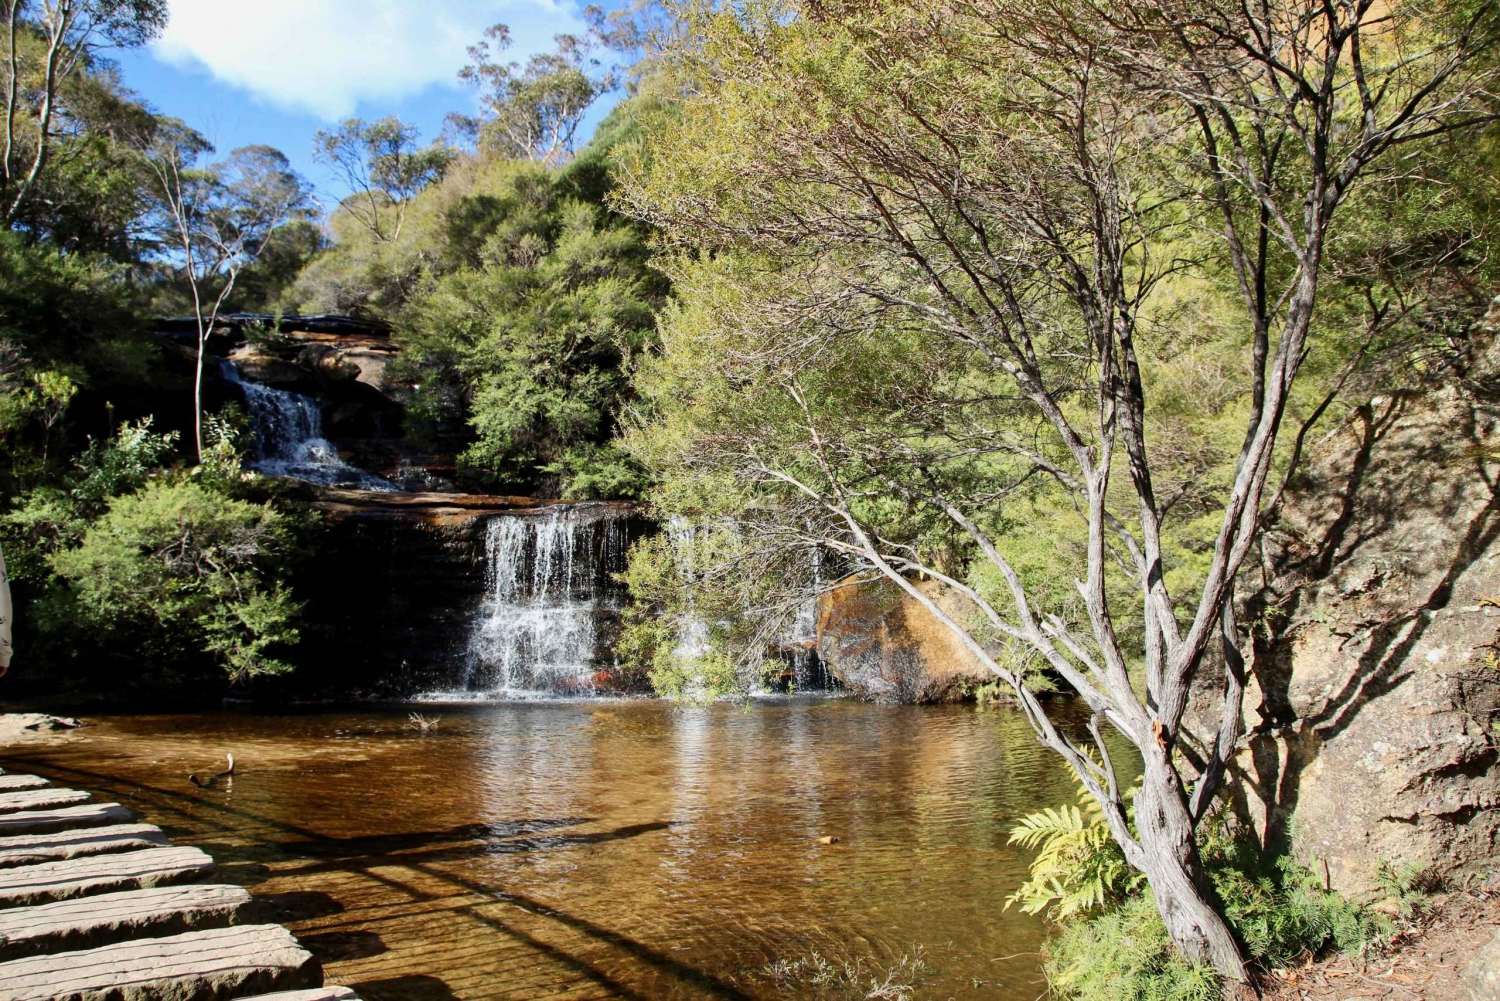 From Sydney: Blue Mountains, Sydney Zoo & Scenic World Tour